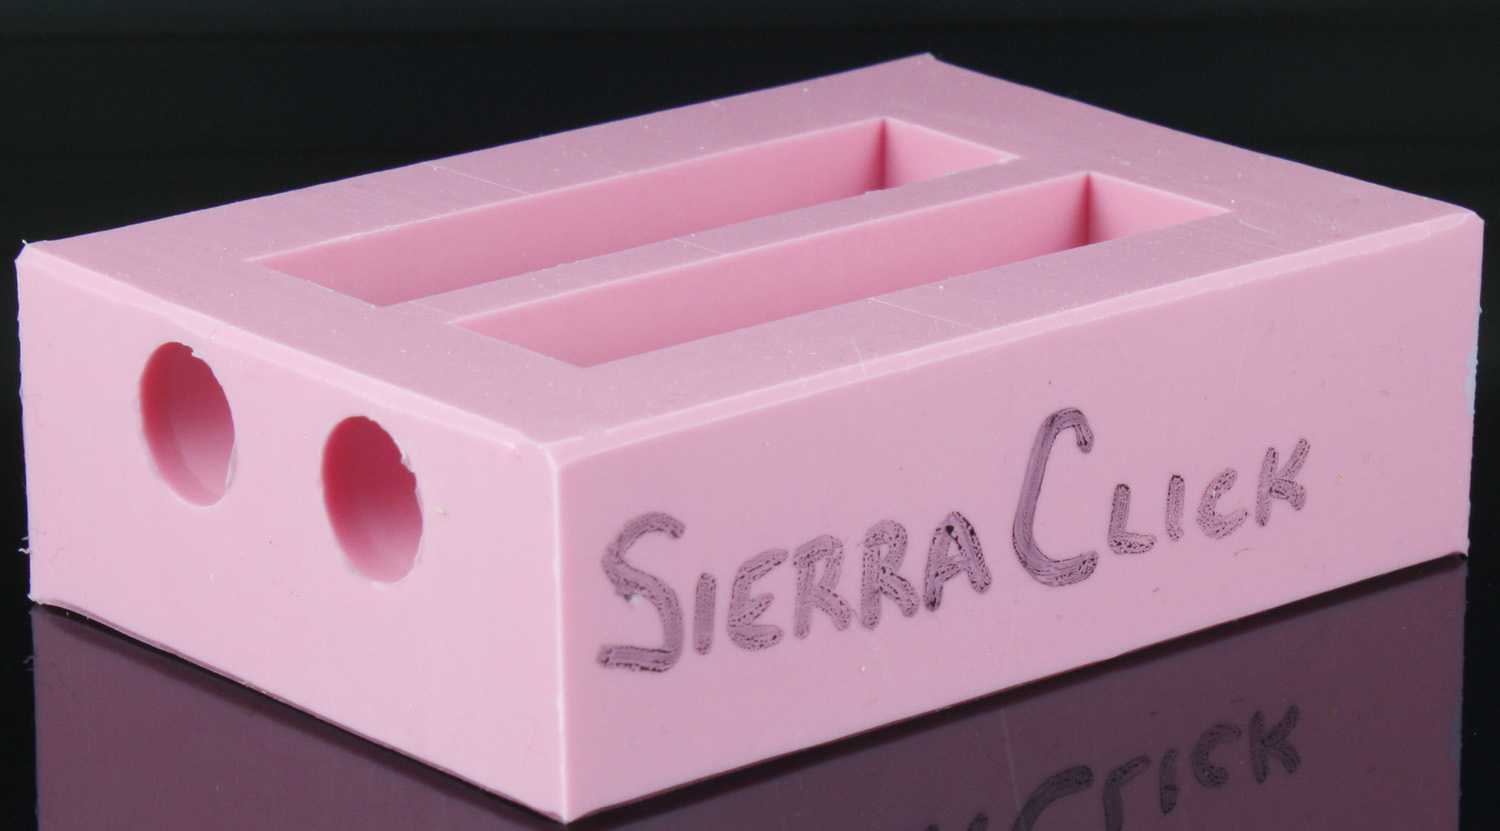 Sierra Click Series "Tube-In" Casting Mold